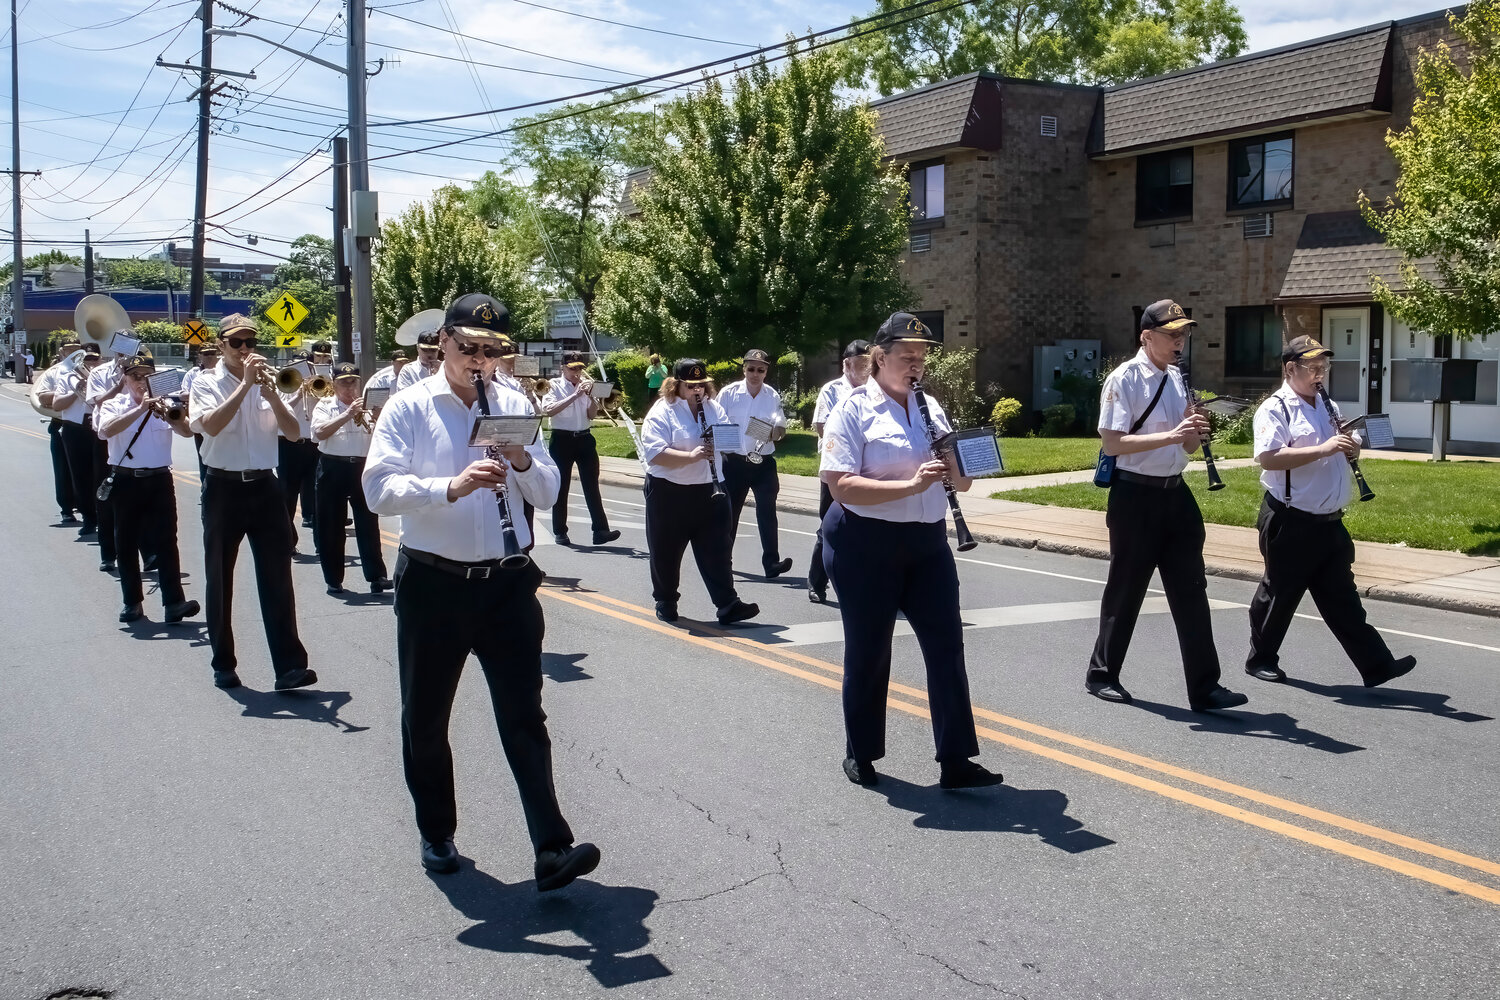 Our Lady of Good Counsel Mazza band members marched and performed during the Inwood Memorial Day Parade on May 28.